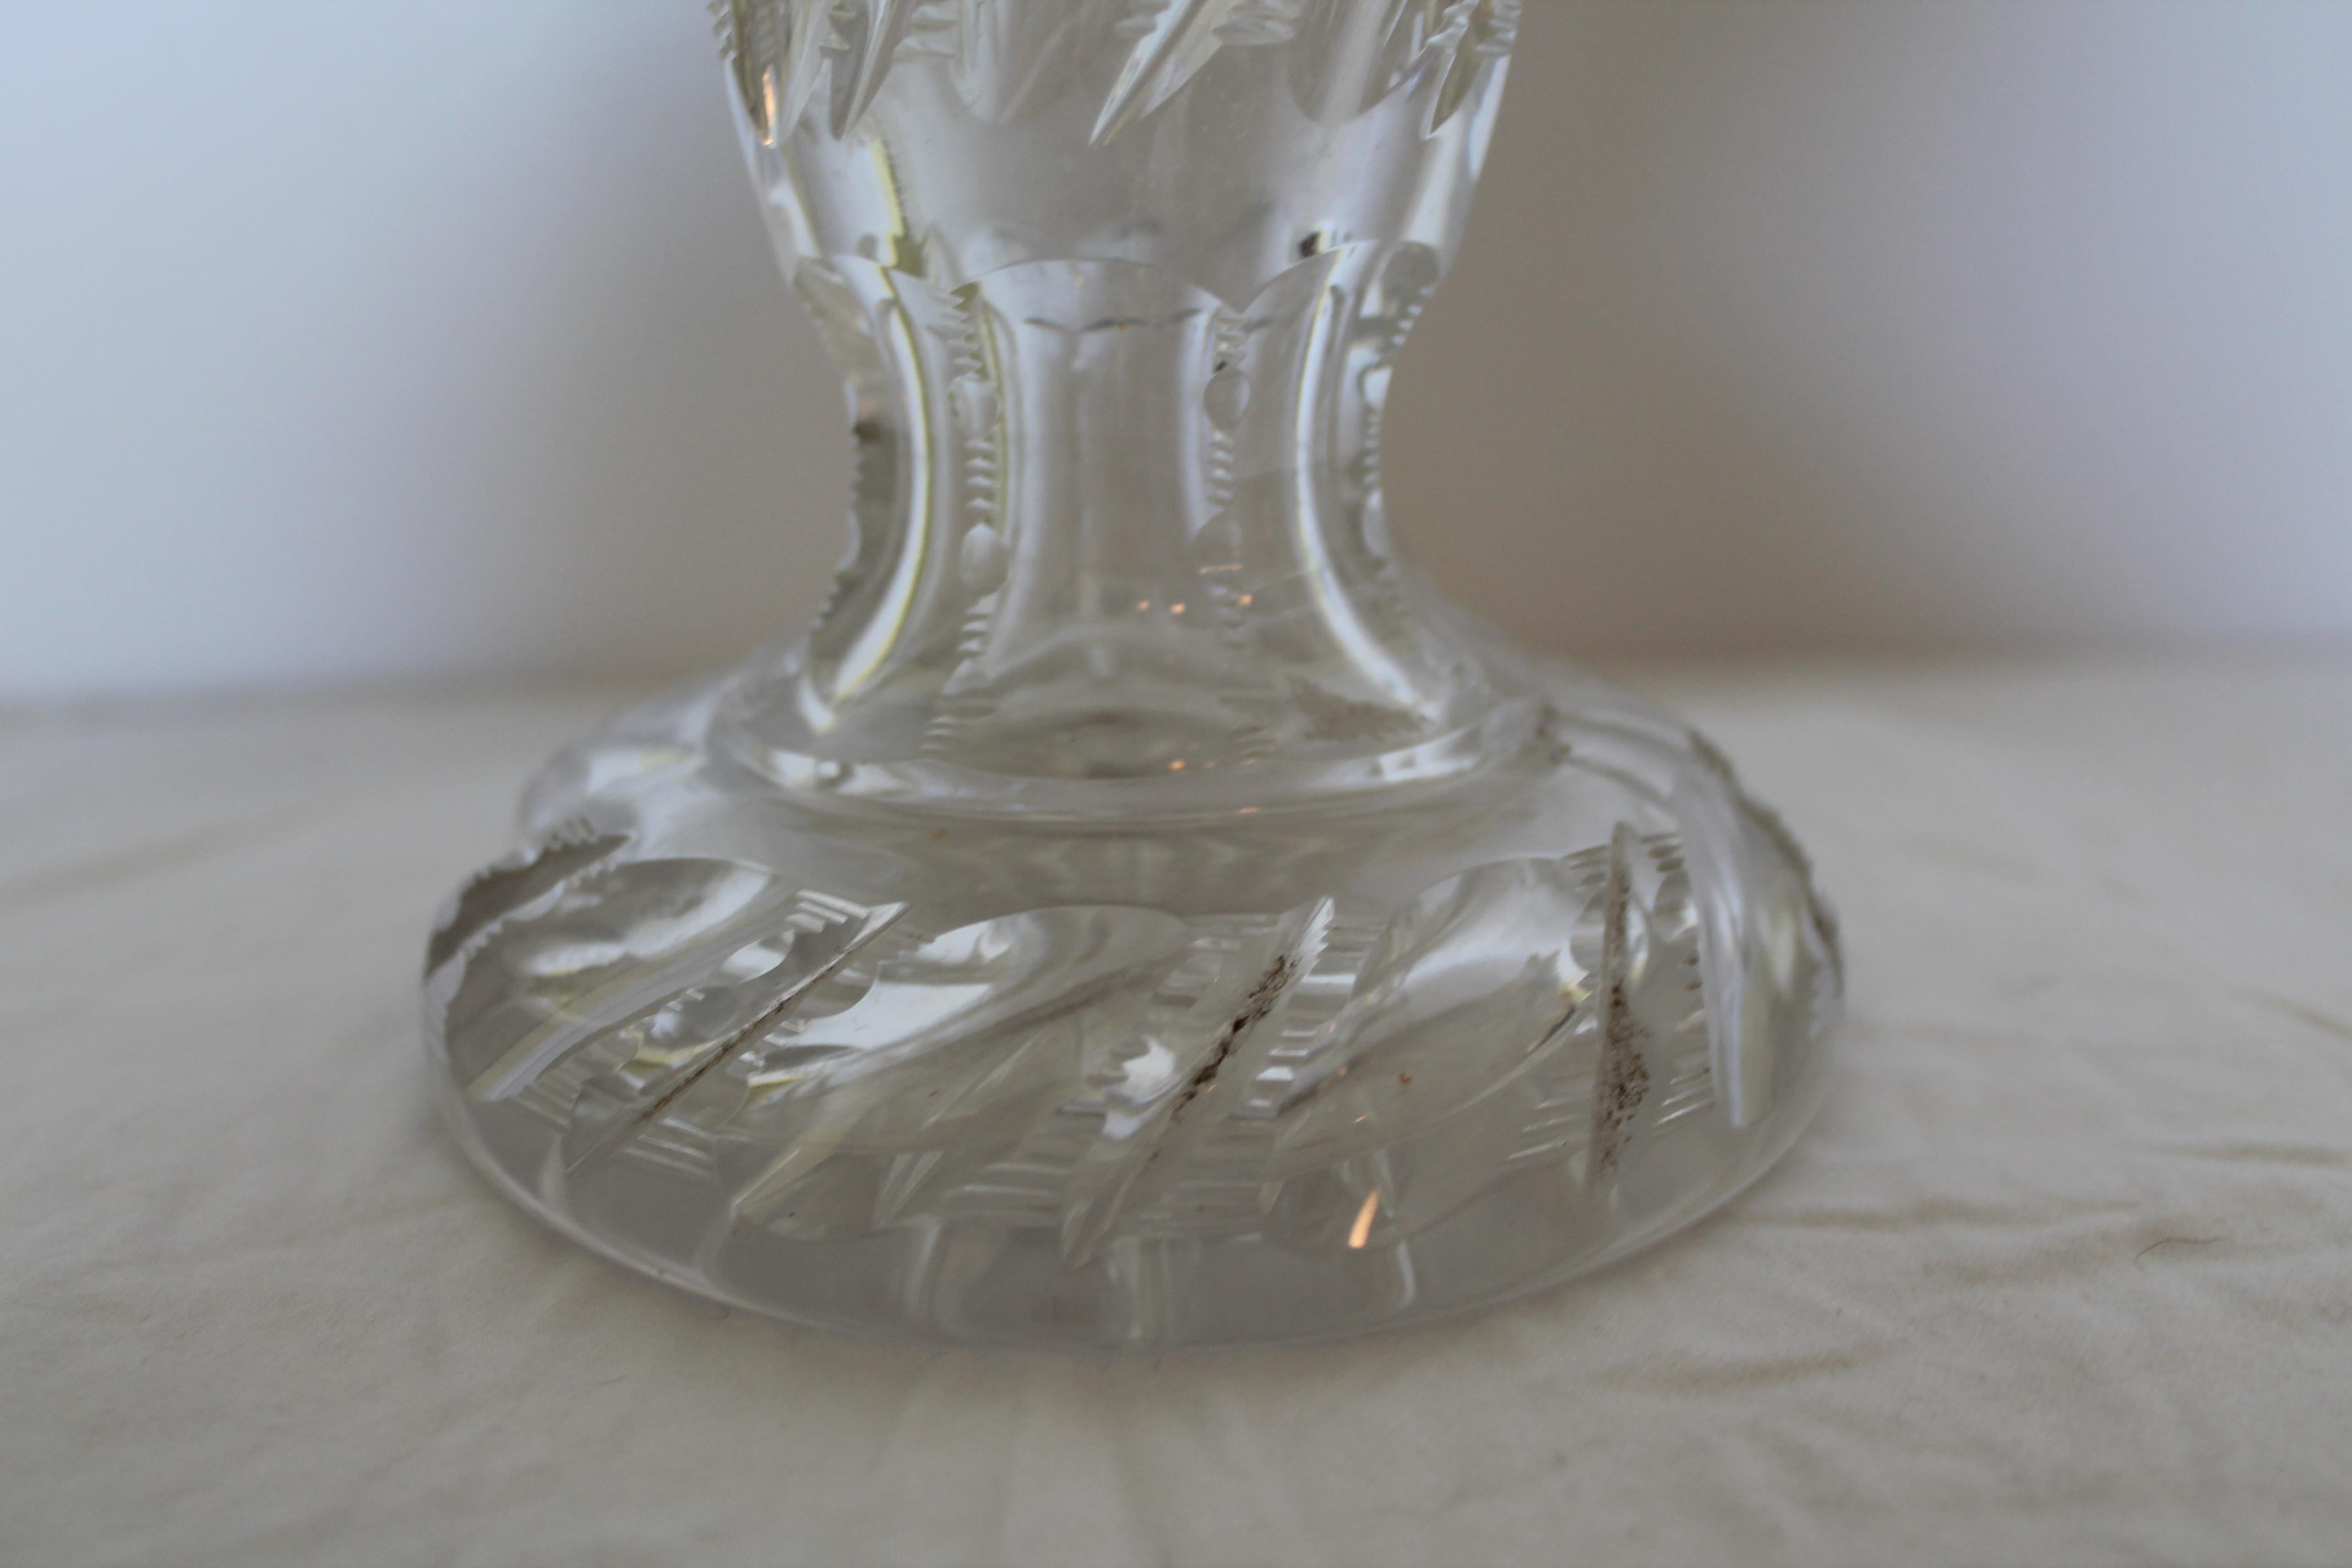 Masterpiece 19thc British Cut Glass Table Lamp by F & C Osler. This lamp is exceptional quality as Osler offered the highest craftsmanship. Purchased in Holland from a lighting dealer. The 2 pieces are thick and make for a heavy. Unsigned Osler.